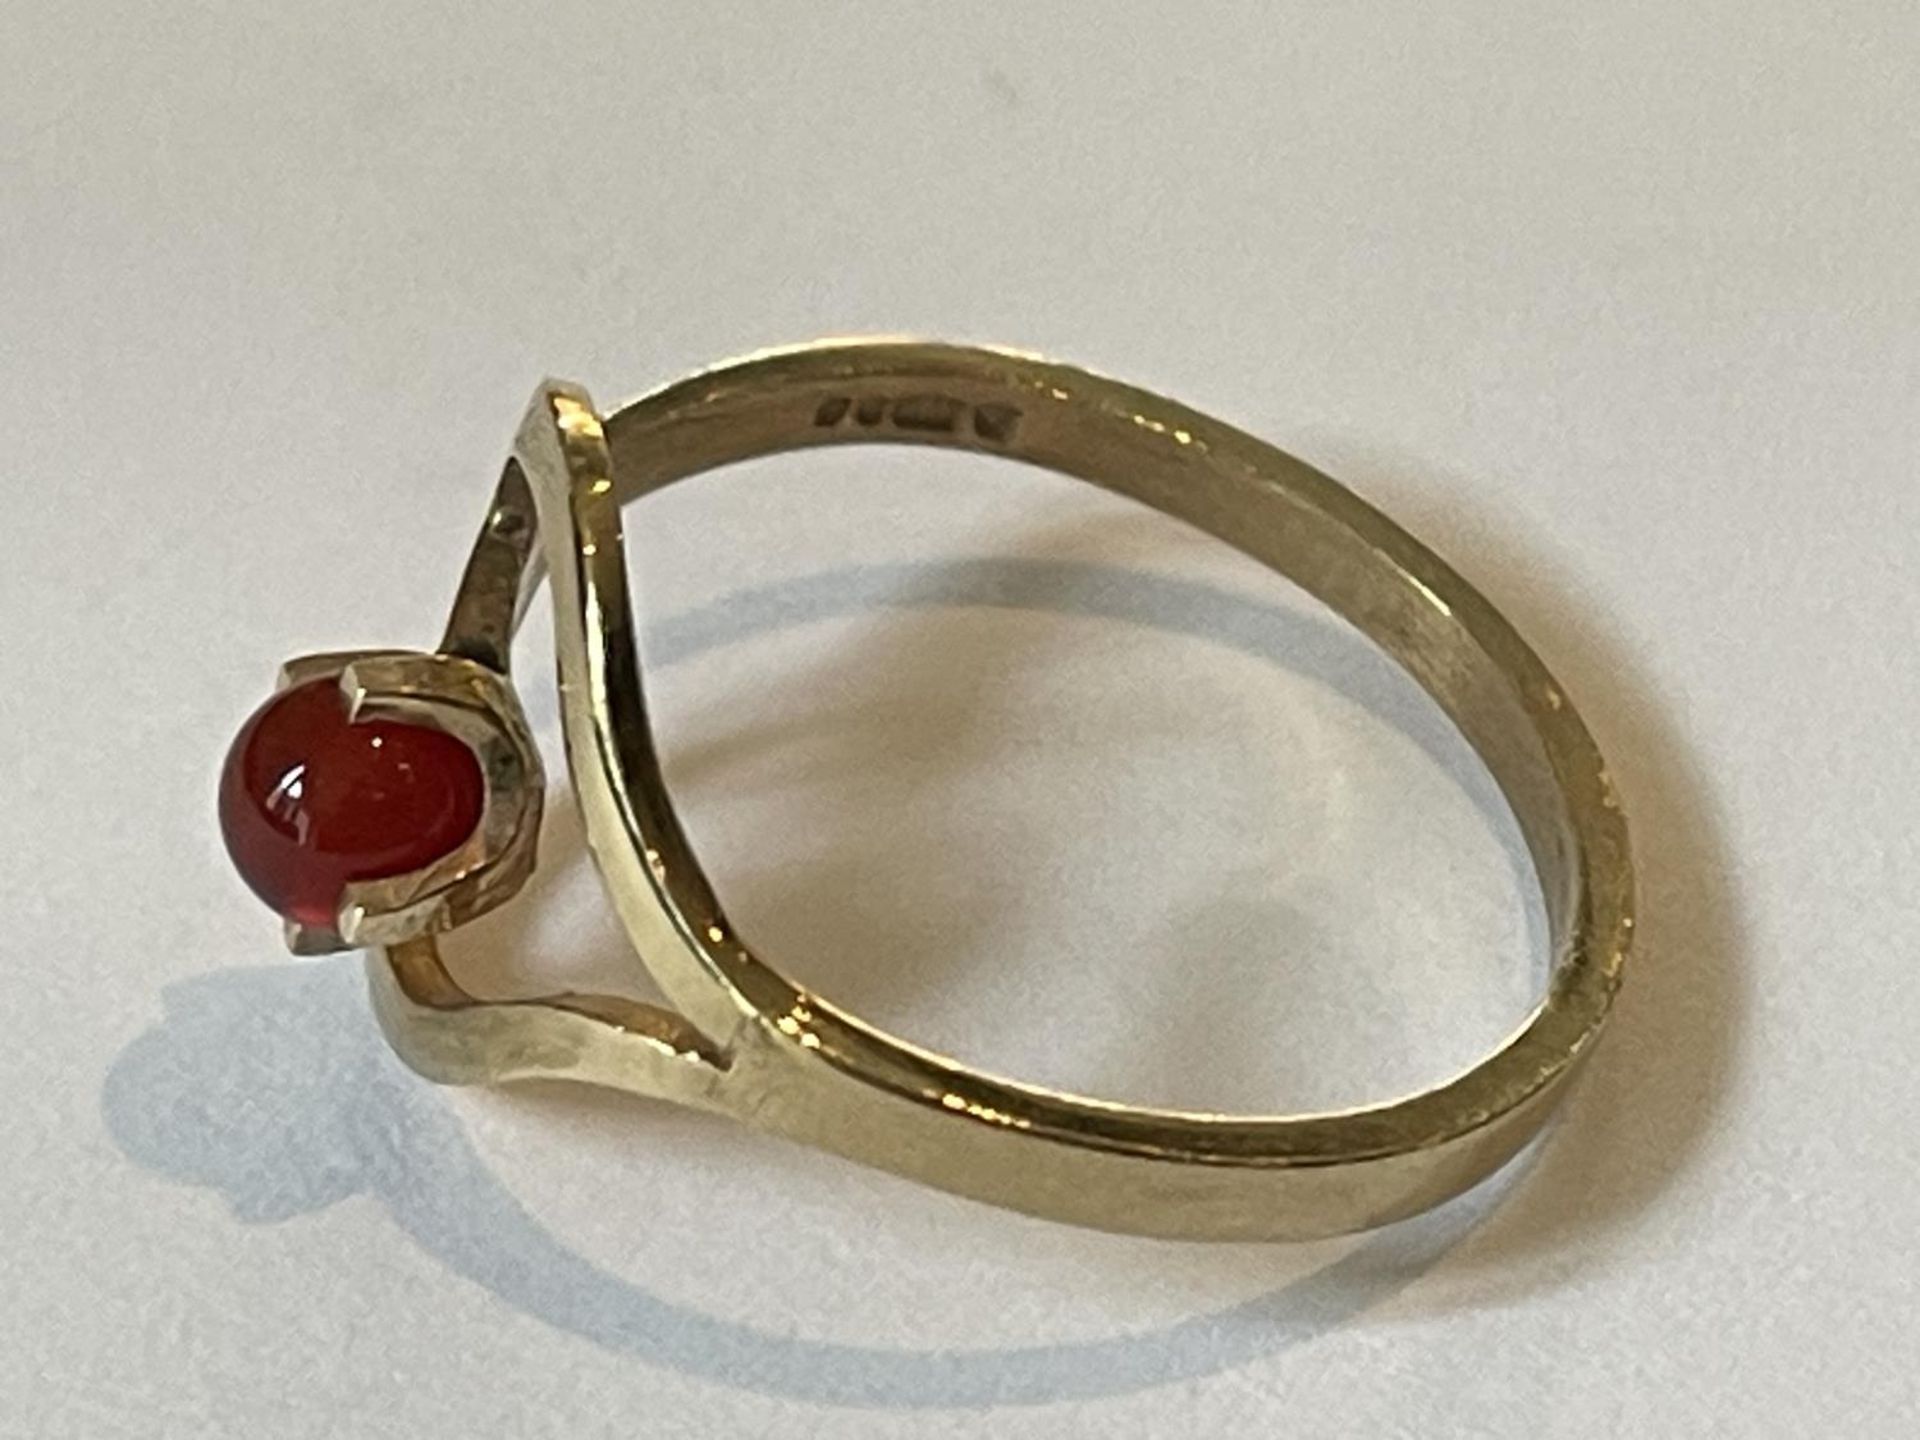 A 9 CARAT GOLD RING WITH A SPHERICAL GARNET IN A HEART SETTING SIZE O - Image 2 of 3